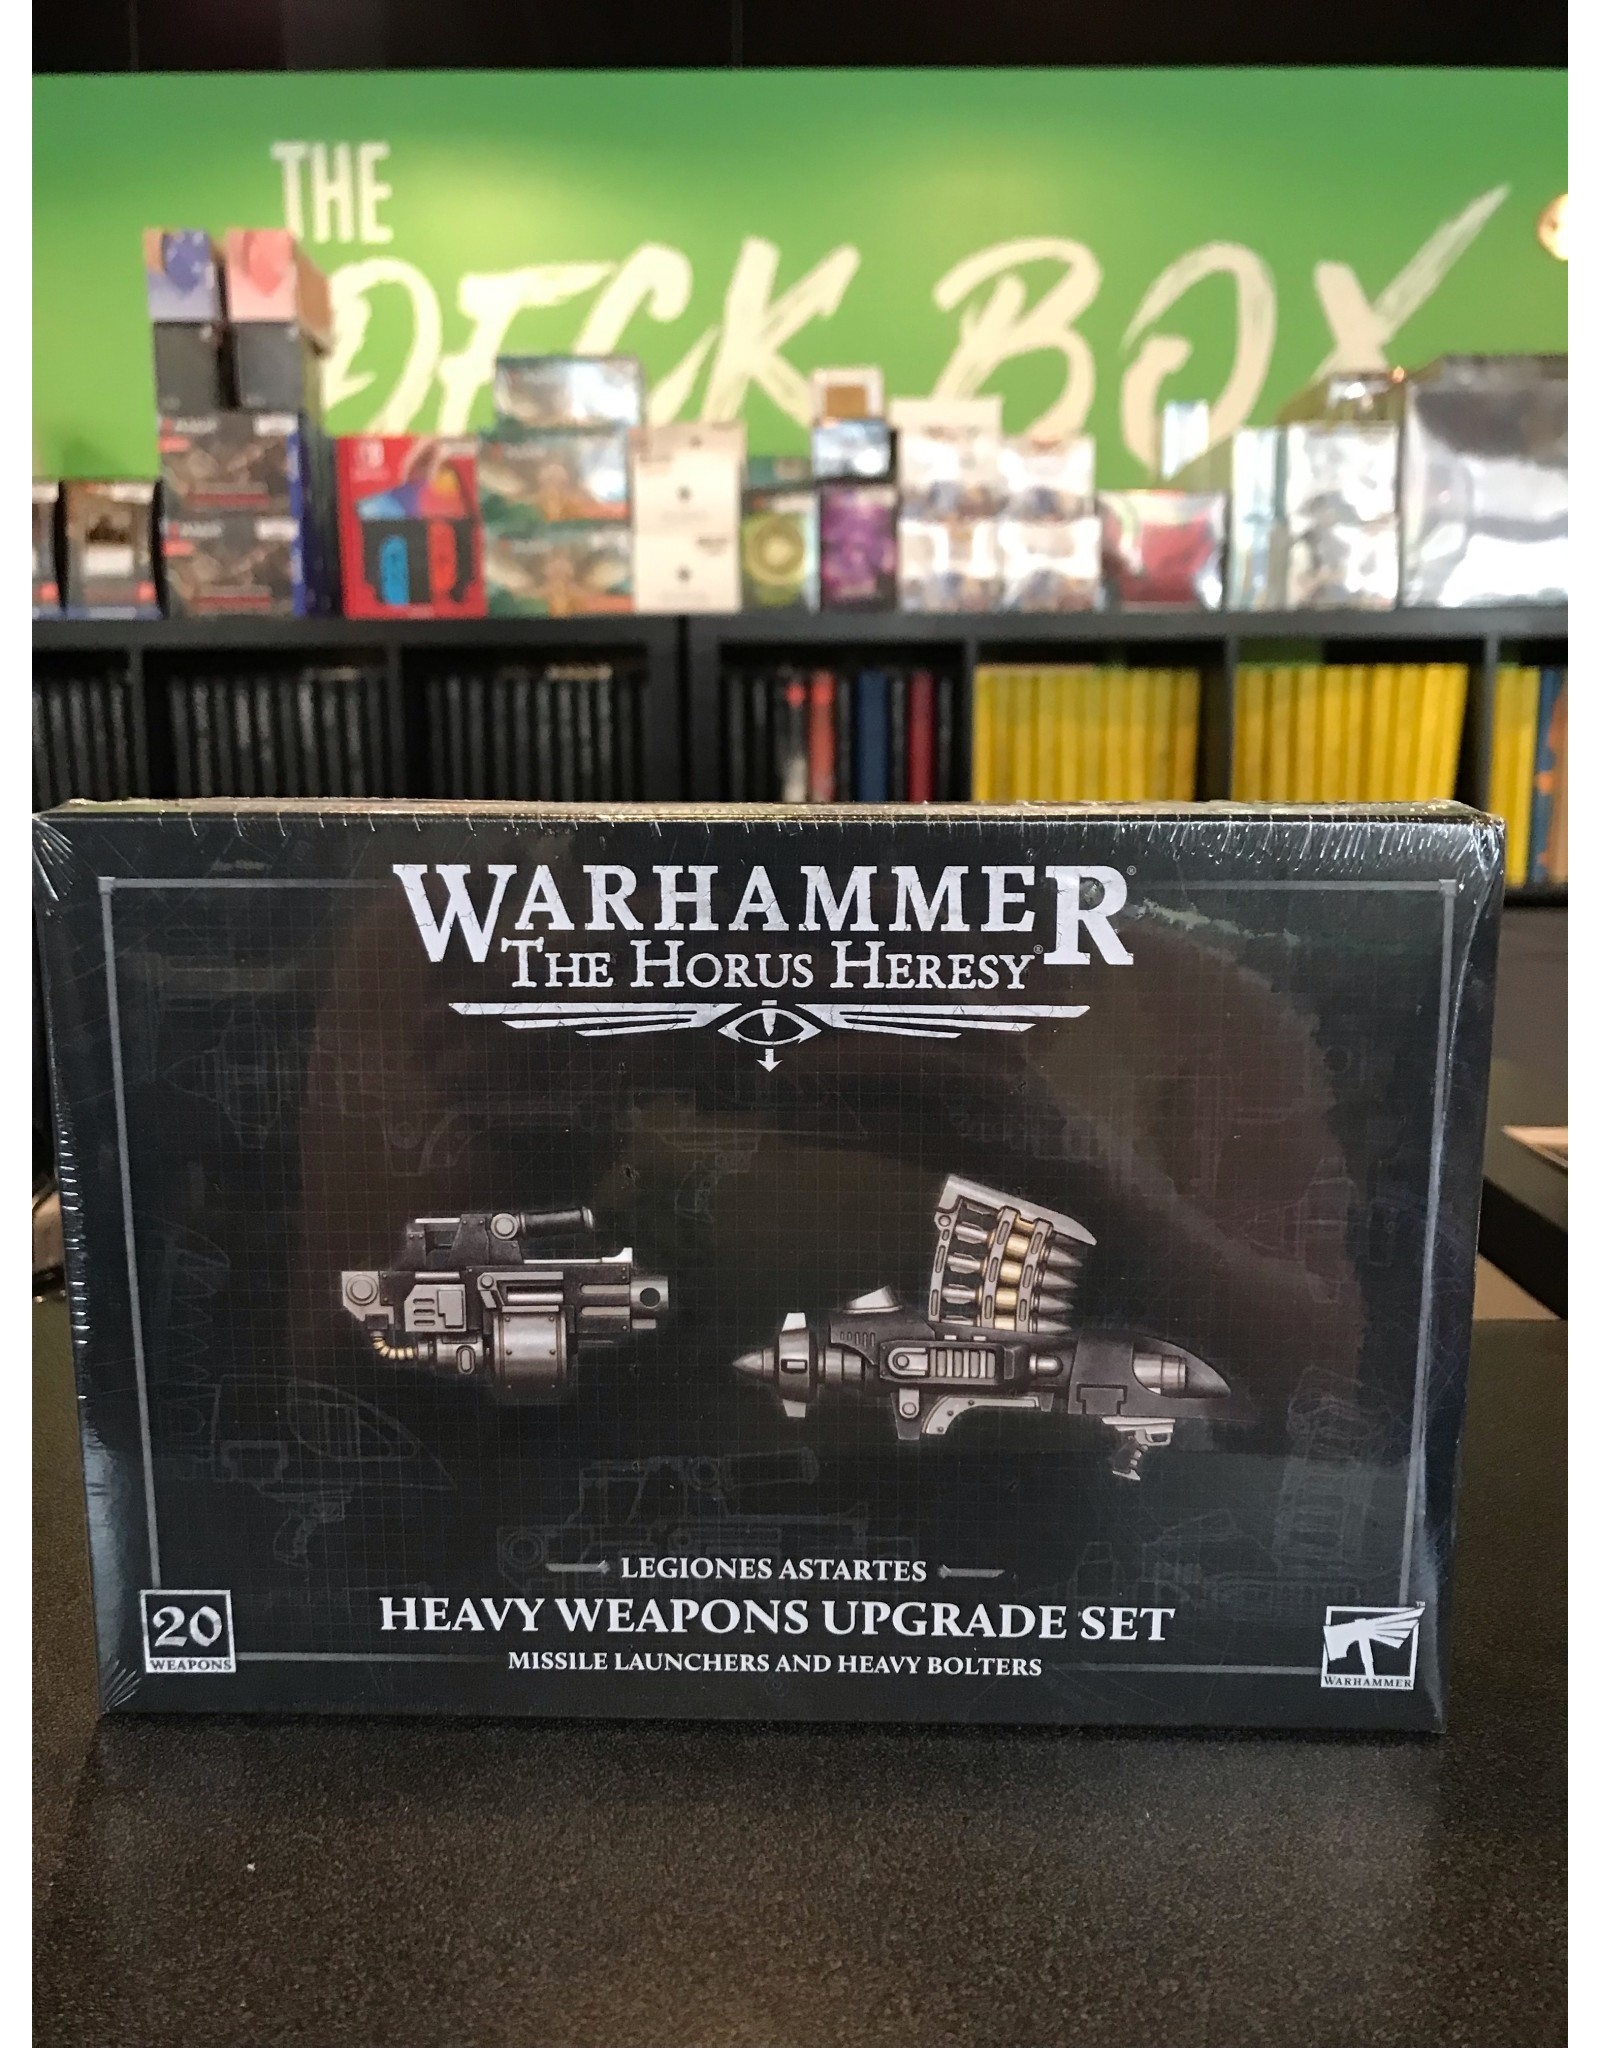 Warhammer 40K Heavy Weapons Upgrade Set – Missile Launchers and Heavy Bolters